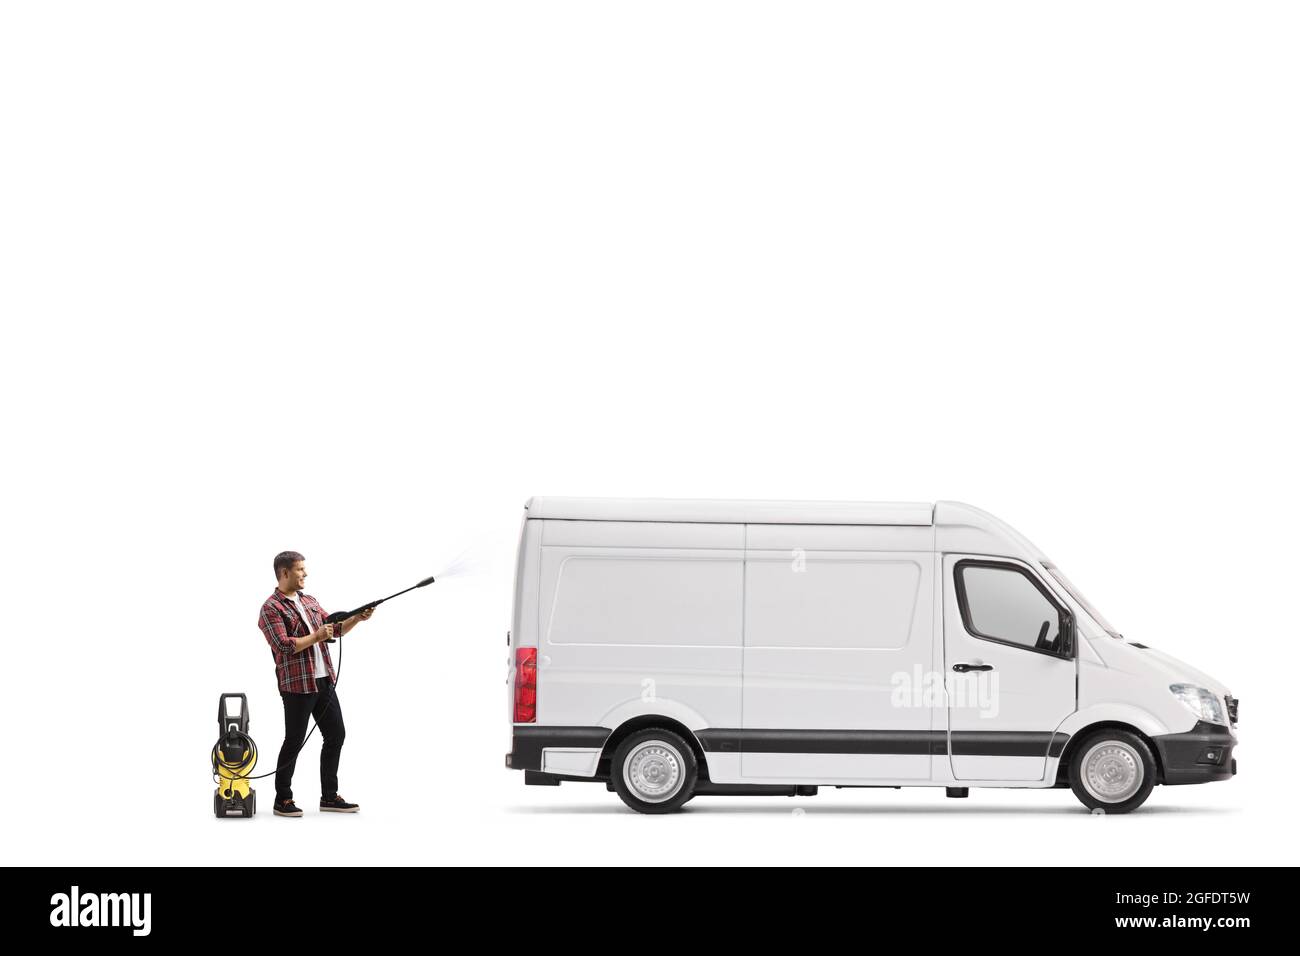 Full length shot of a man cleaning a white van with a pressure washer machine isolated on white background Stock Photo